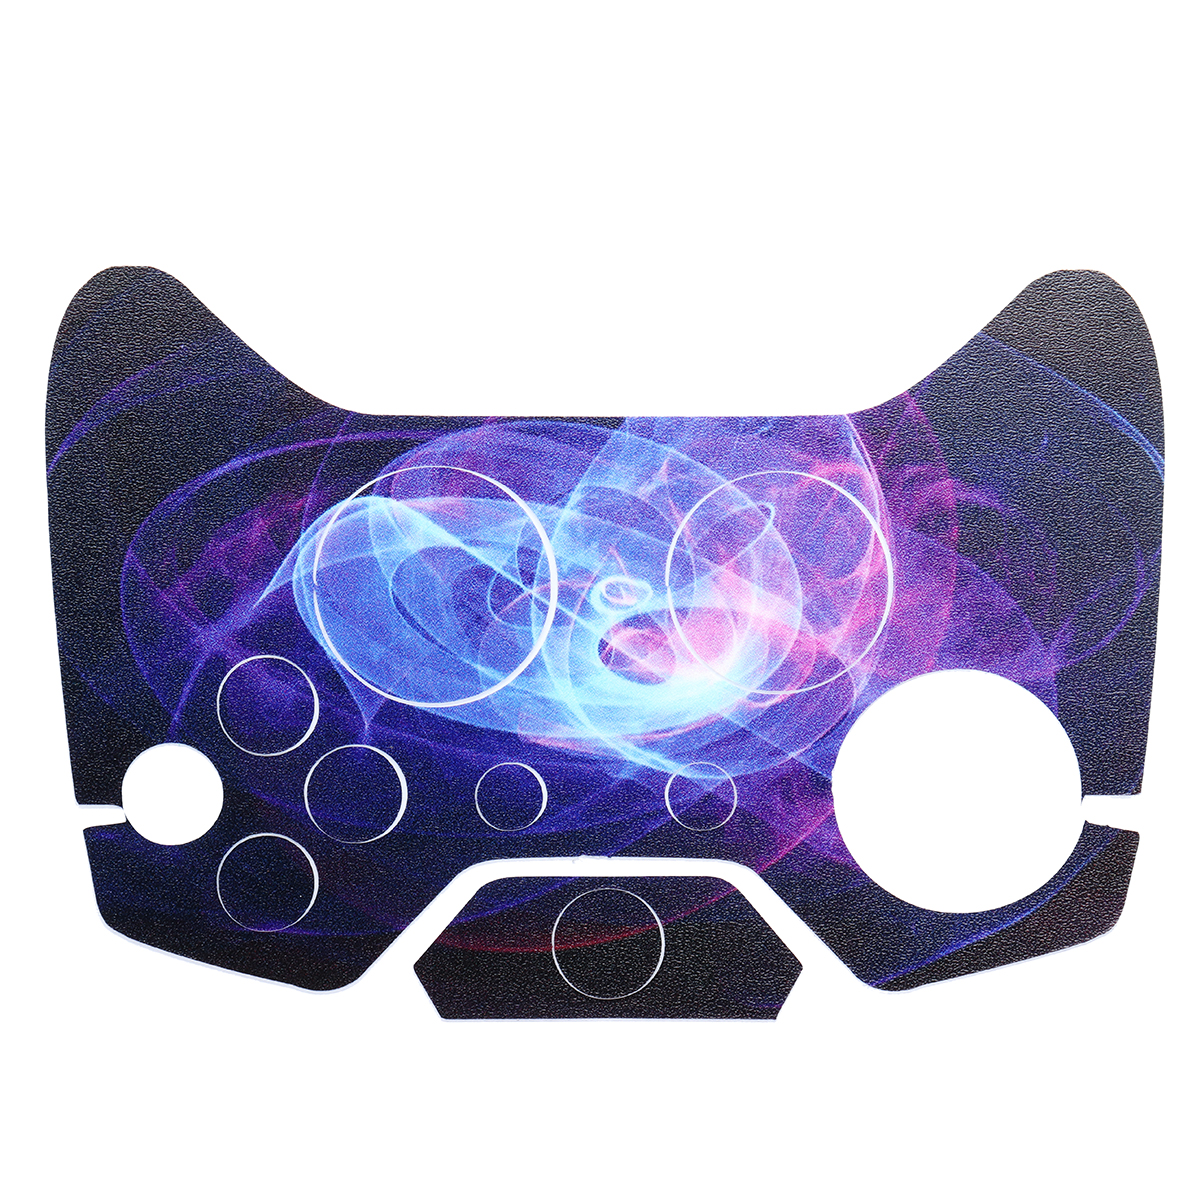 Purple Protective Vinyl Decal Skin Stickers Wrap Cover For Xbox One Game Console Game Controller Kinect 19